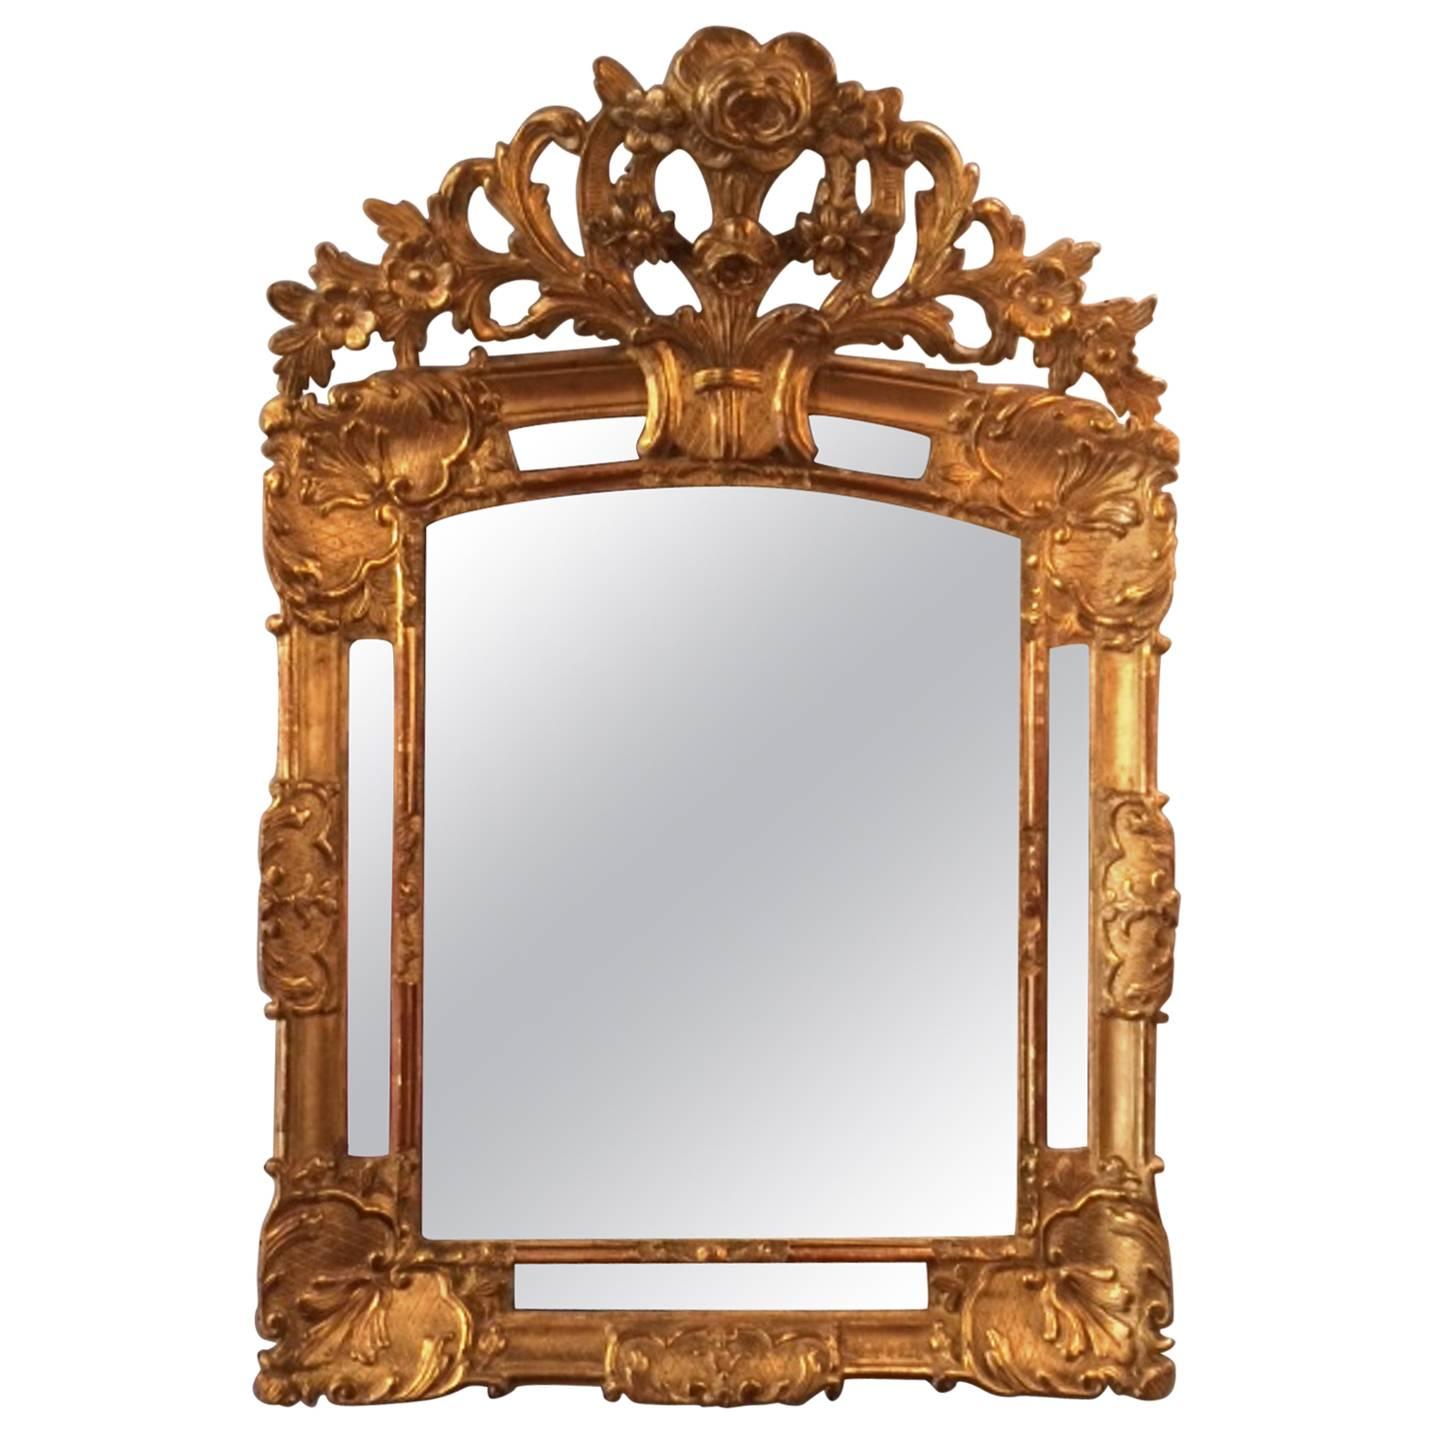 French Louis XIV Period Carved Giltwood Wall Mirror, Early 18th Century